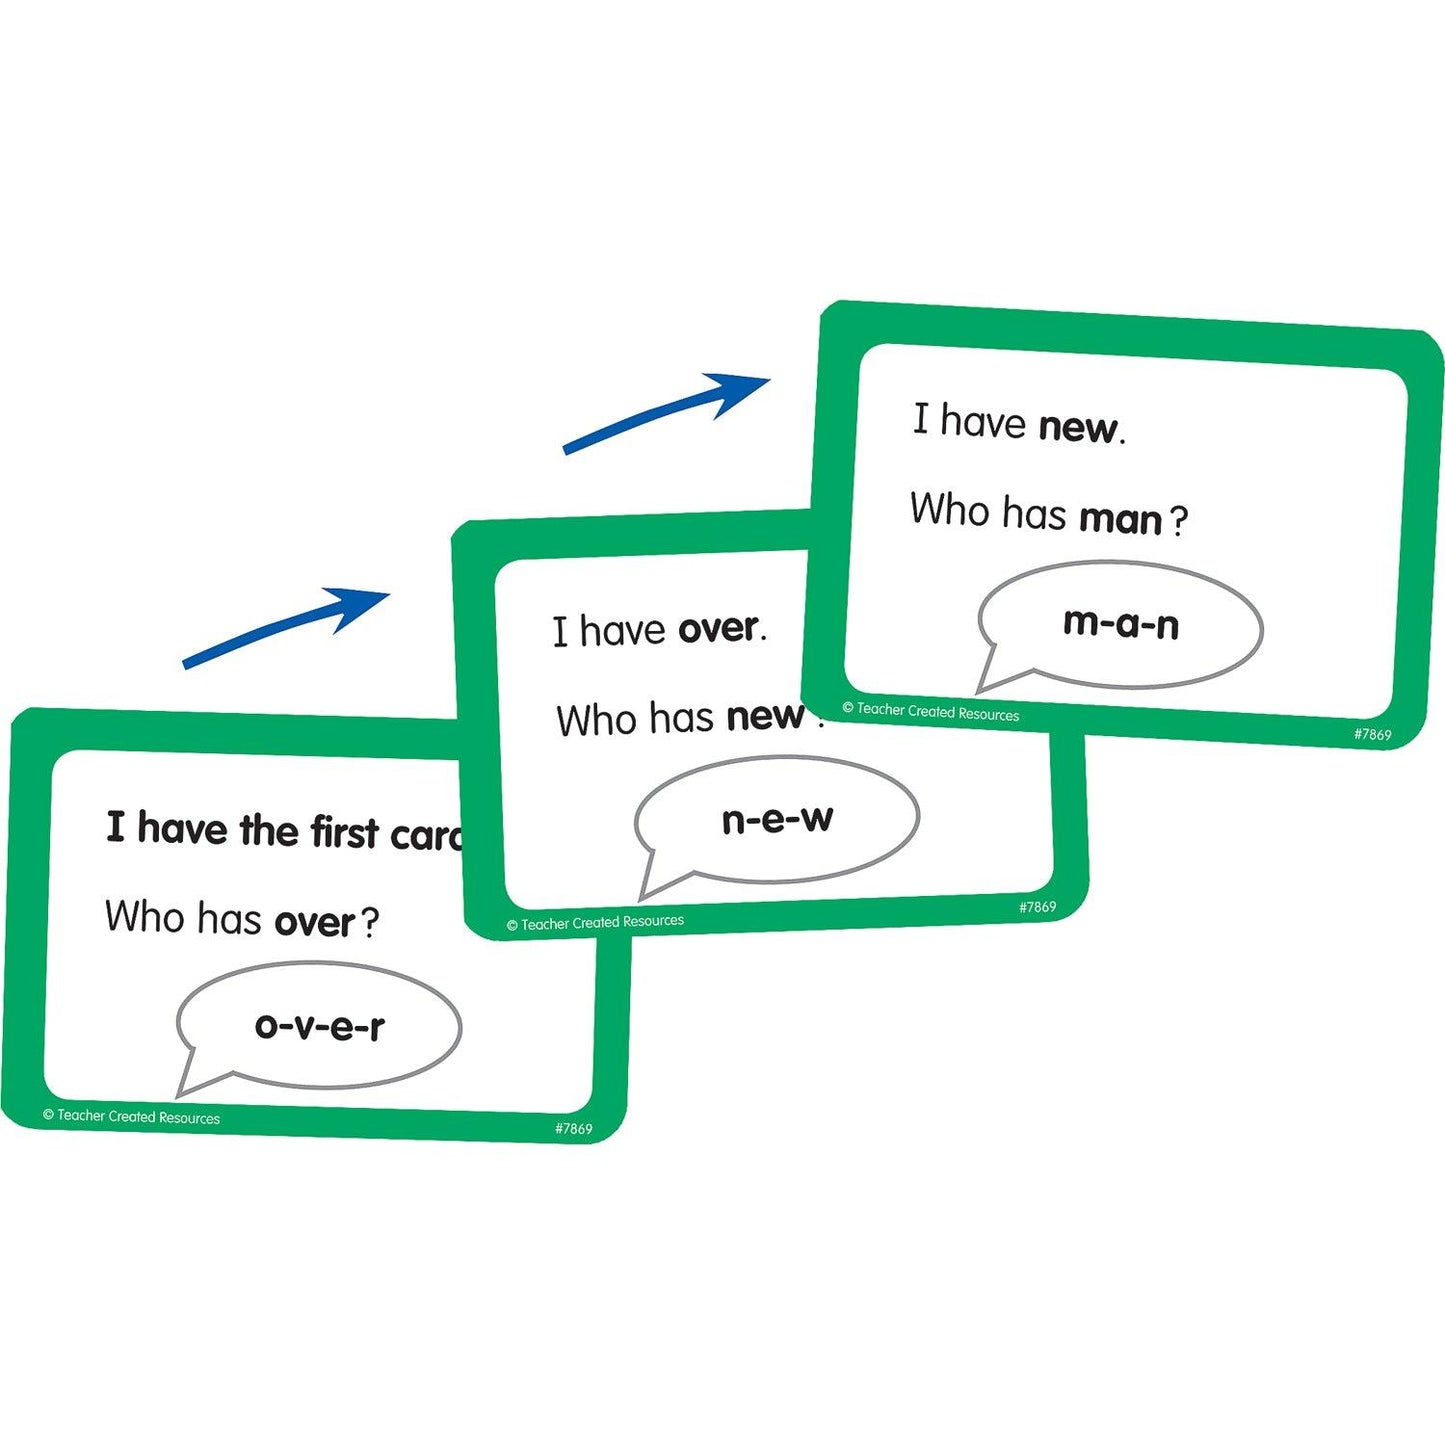 I Have, Who Has Sight Words Game, Grade 1 - Loomini